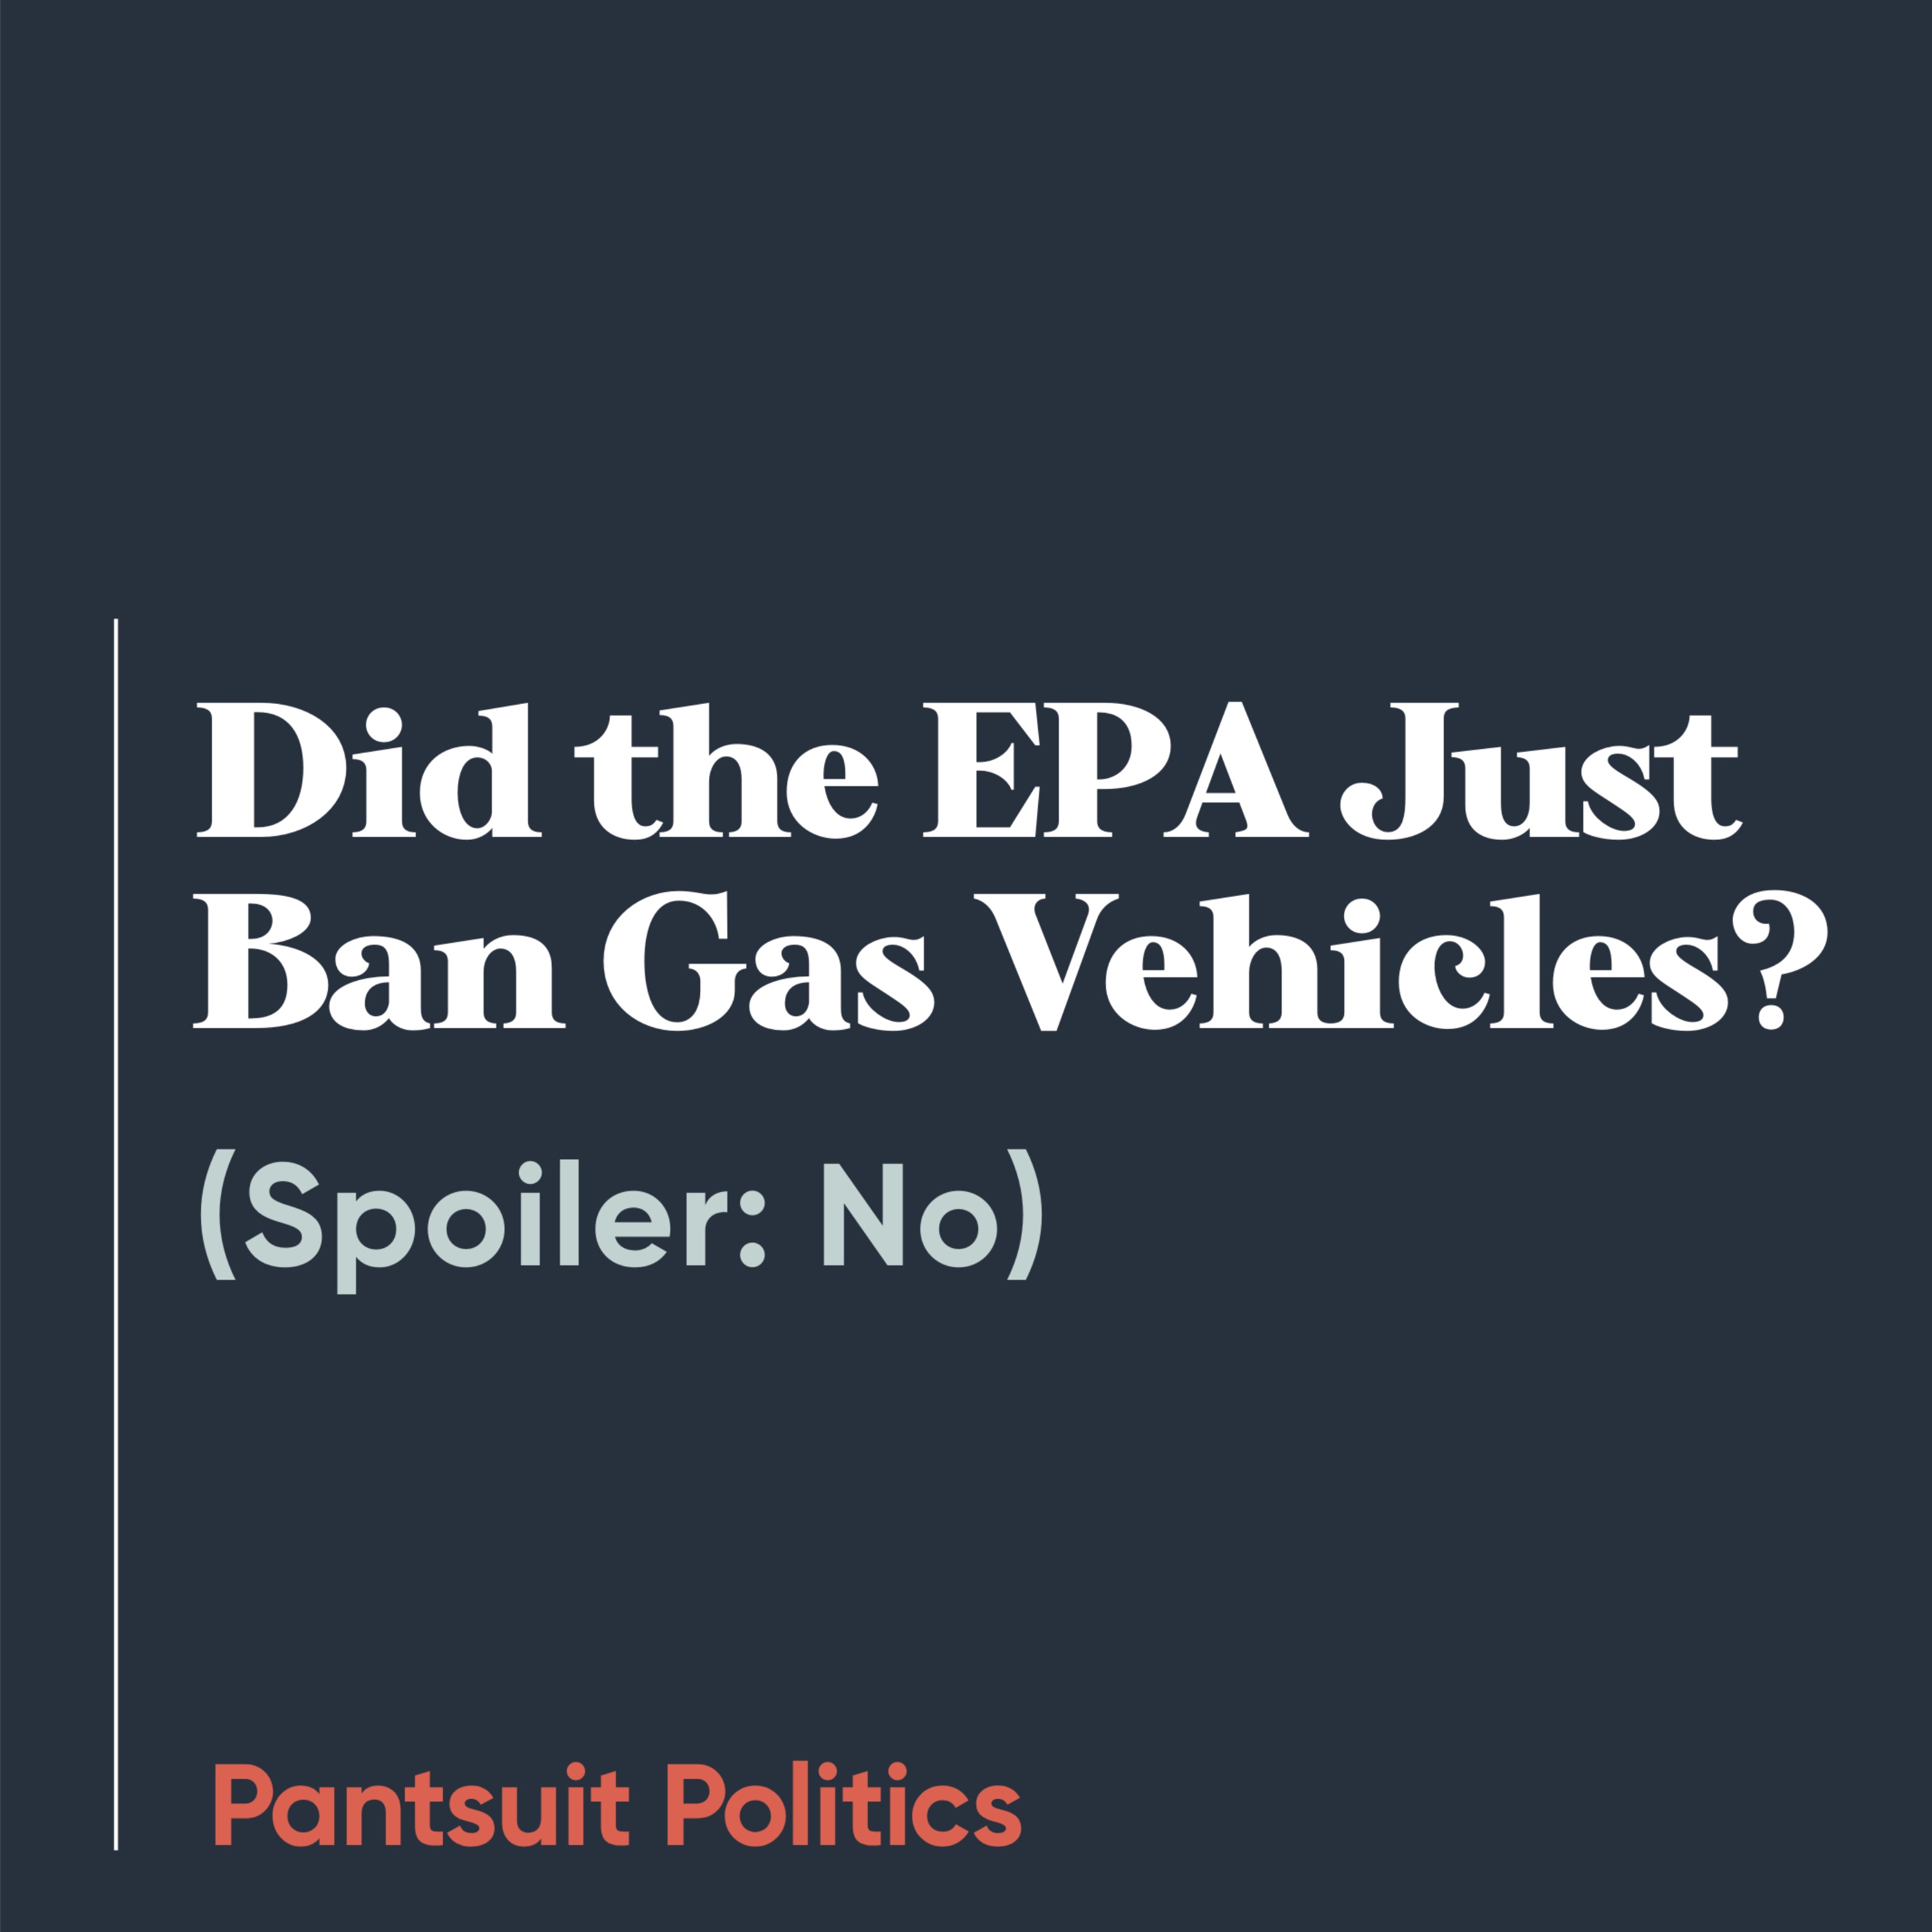 Did the EPA Just Ban Gas Vehicles? (Spoiler: No)